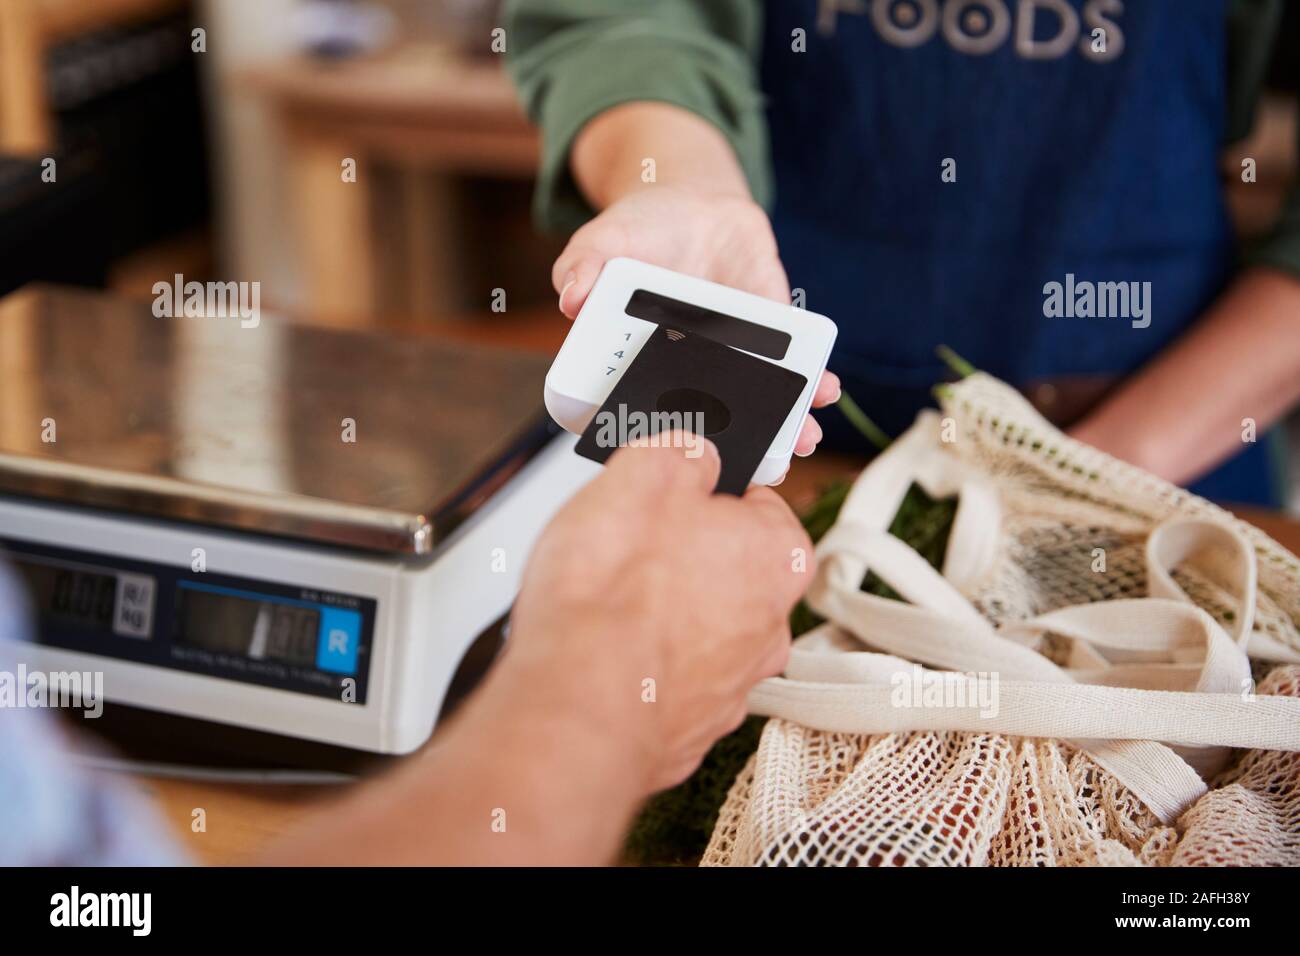 Customer Making Contactless Payment For Shopping At Checkout Of Grocery Store Stock Photo